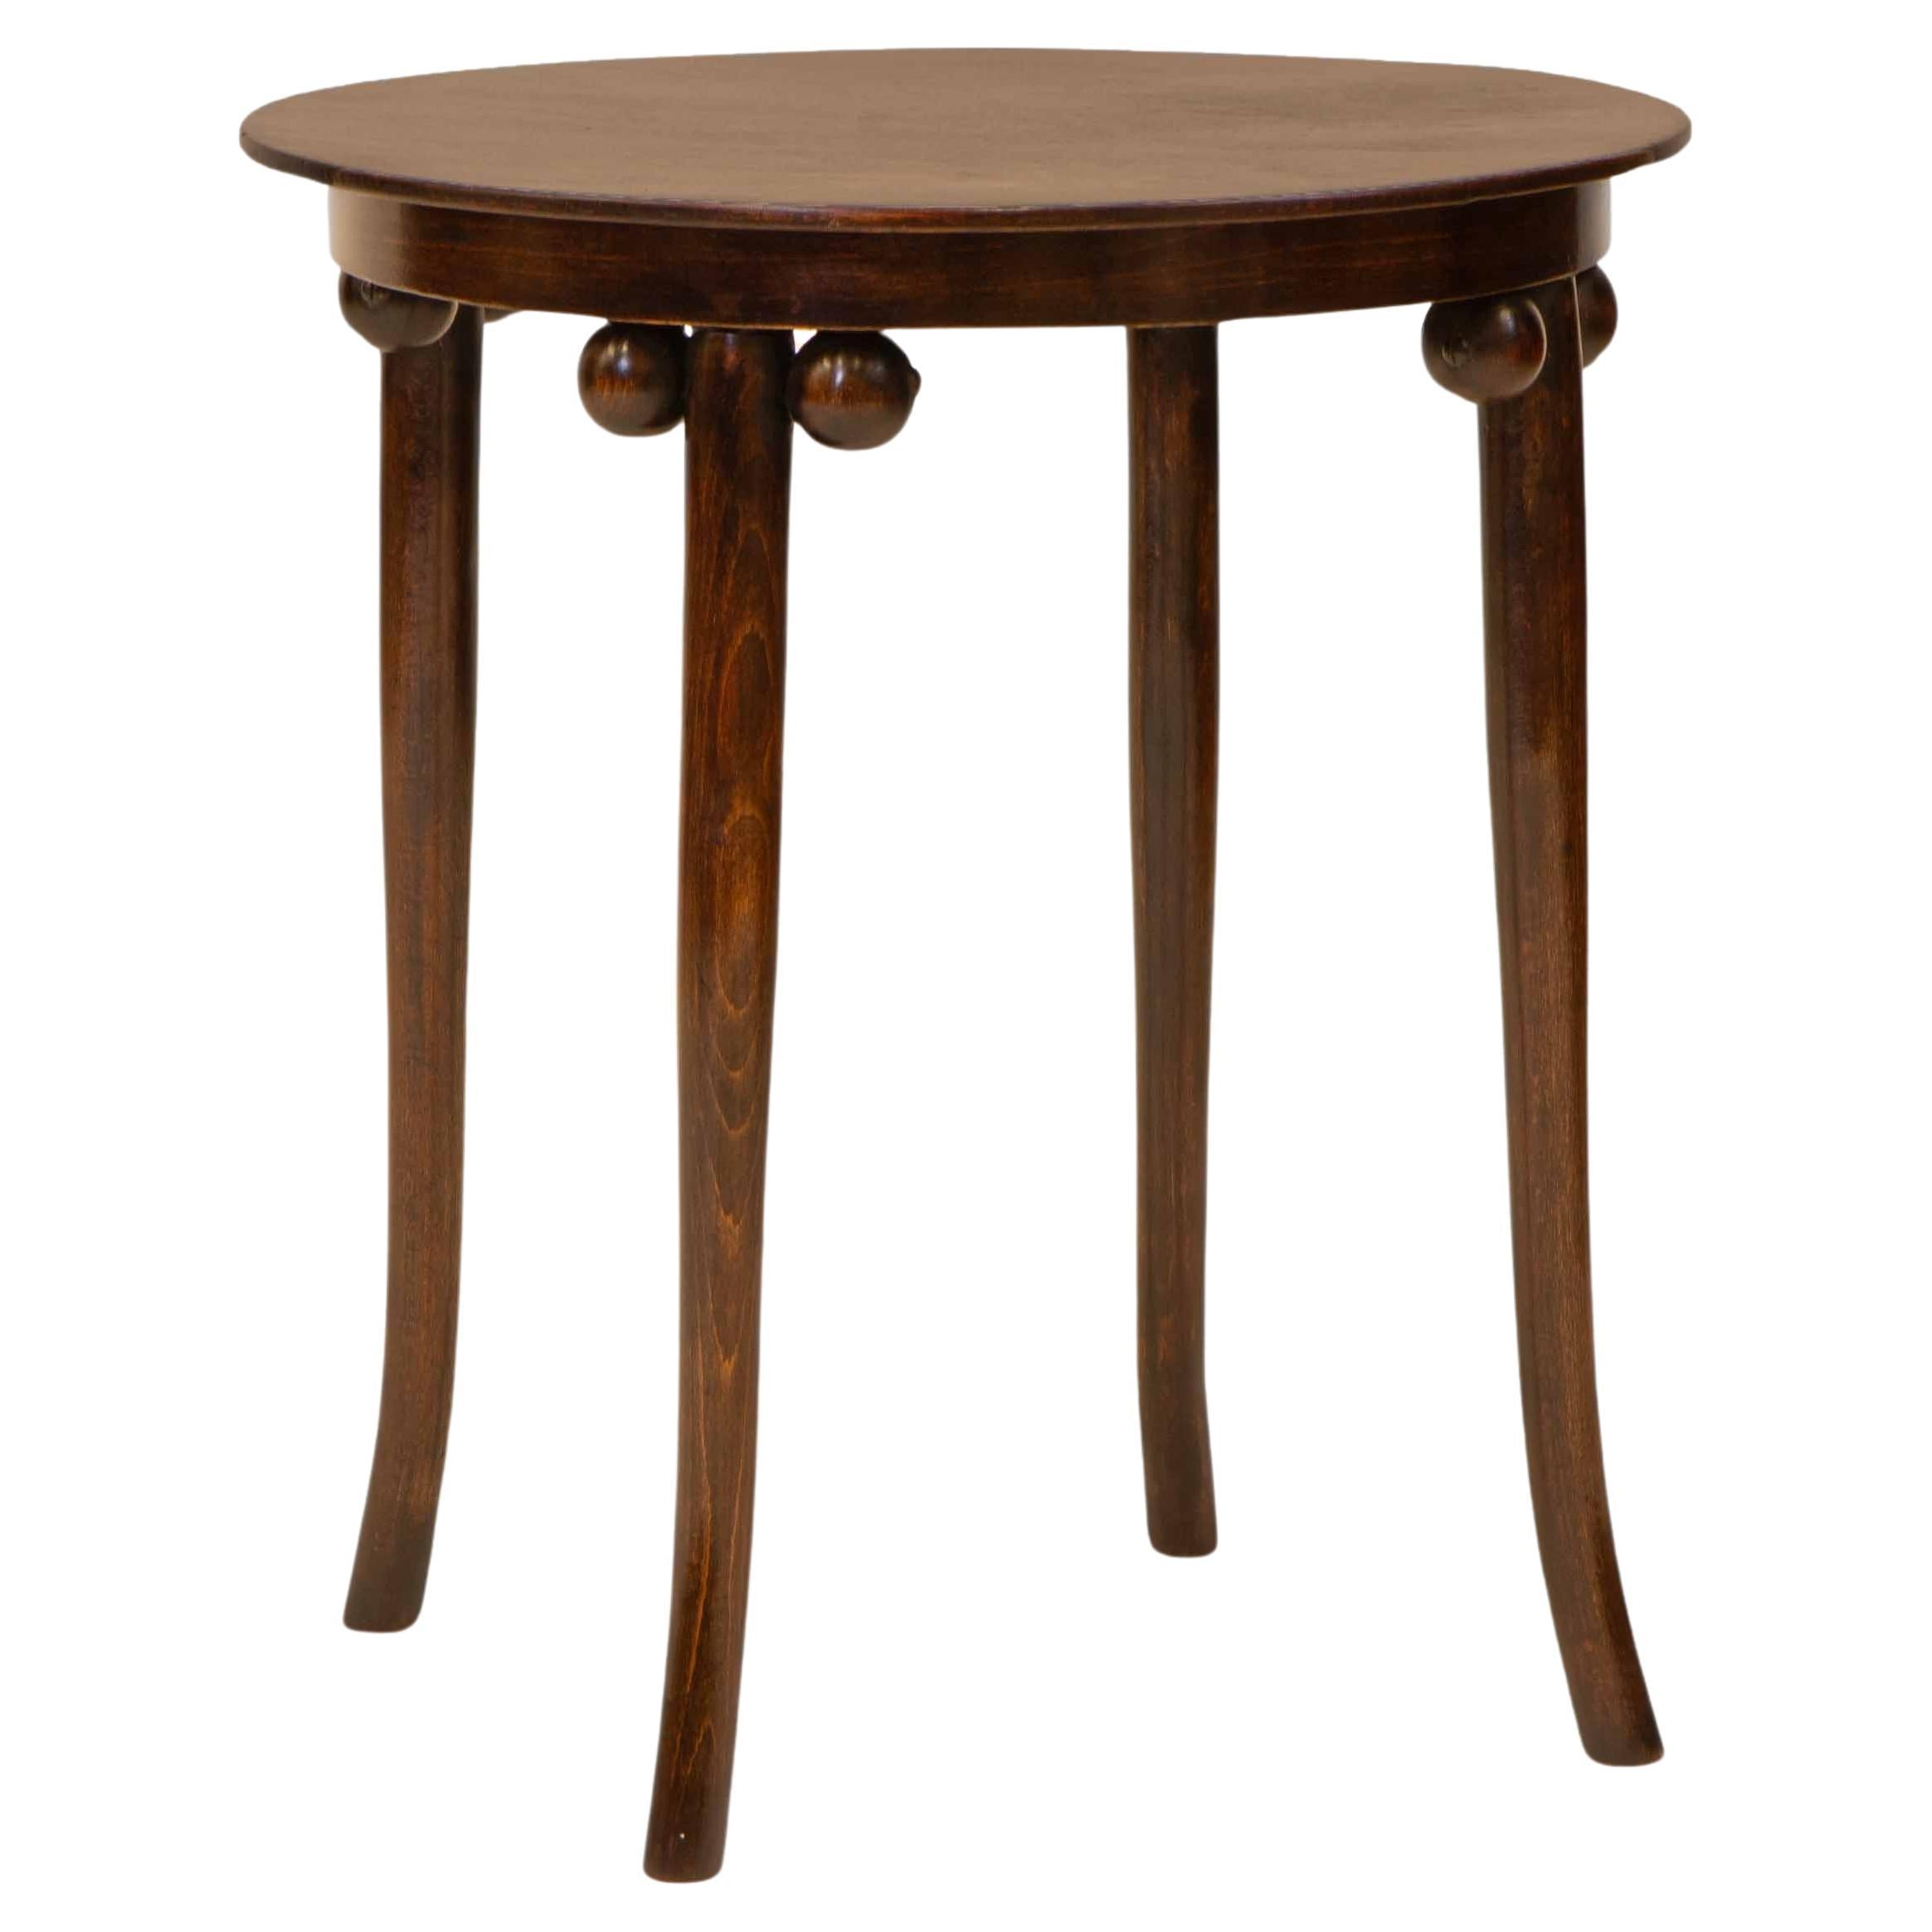  Secessionist Bentwood Side Table Circa 1900